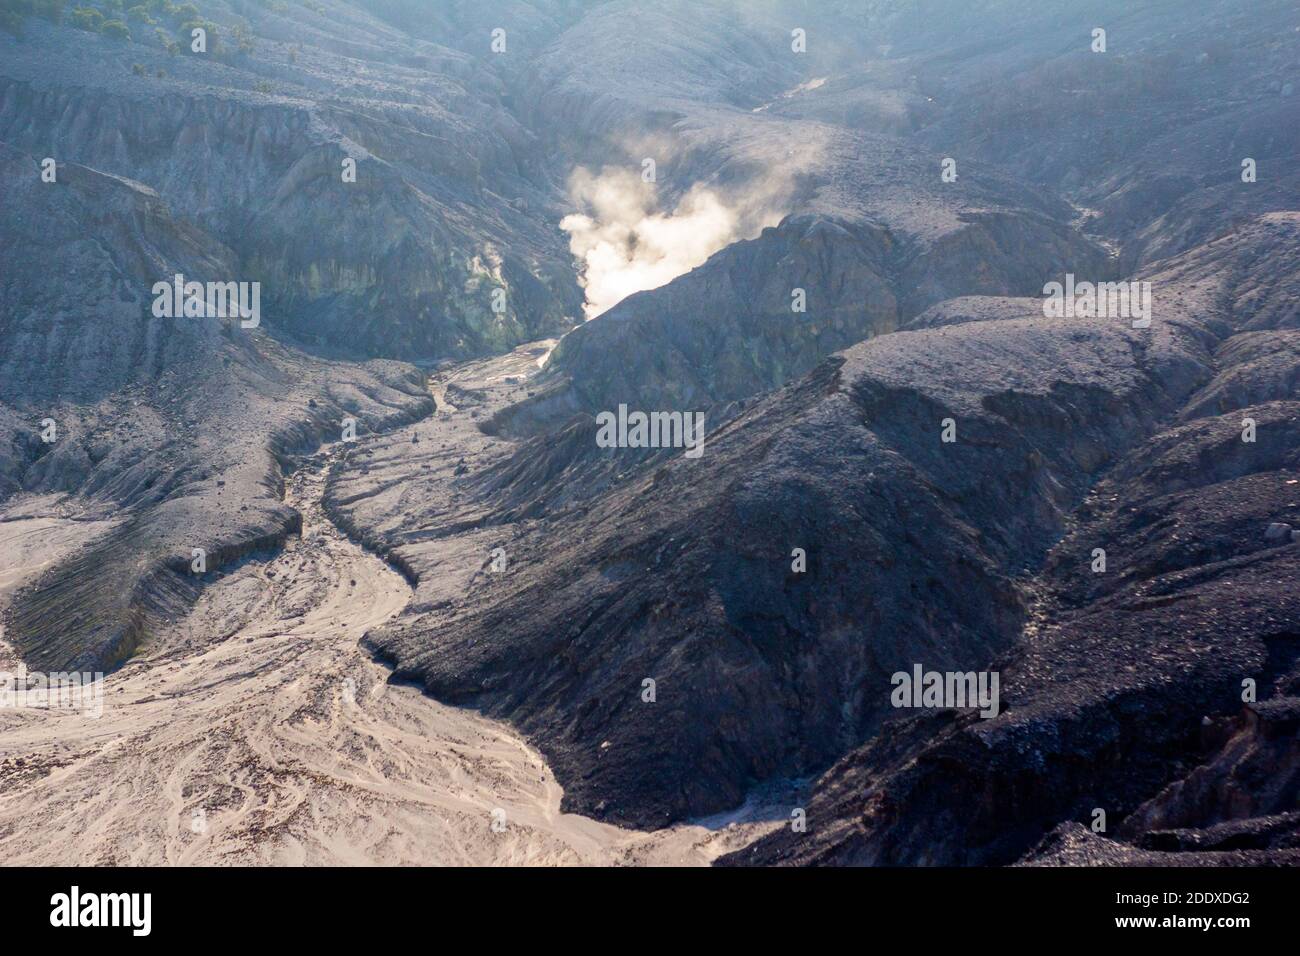 Crater of Tangkuban Perahu, an active volcano in Indonesia Stock Photo